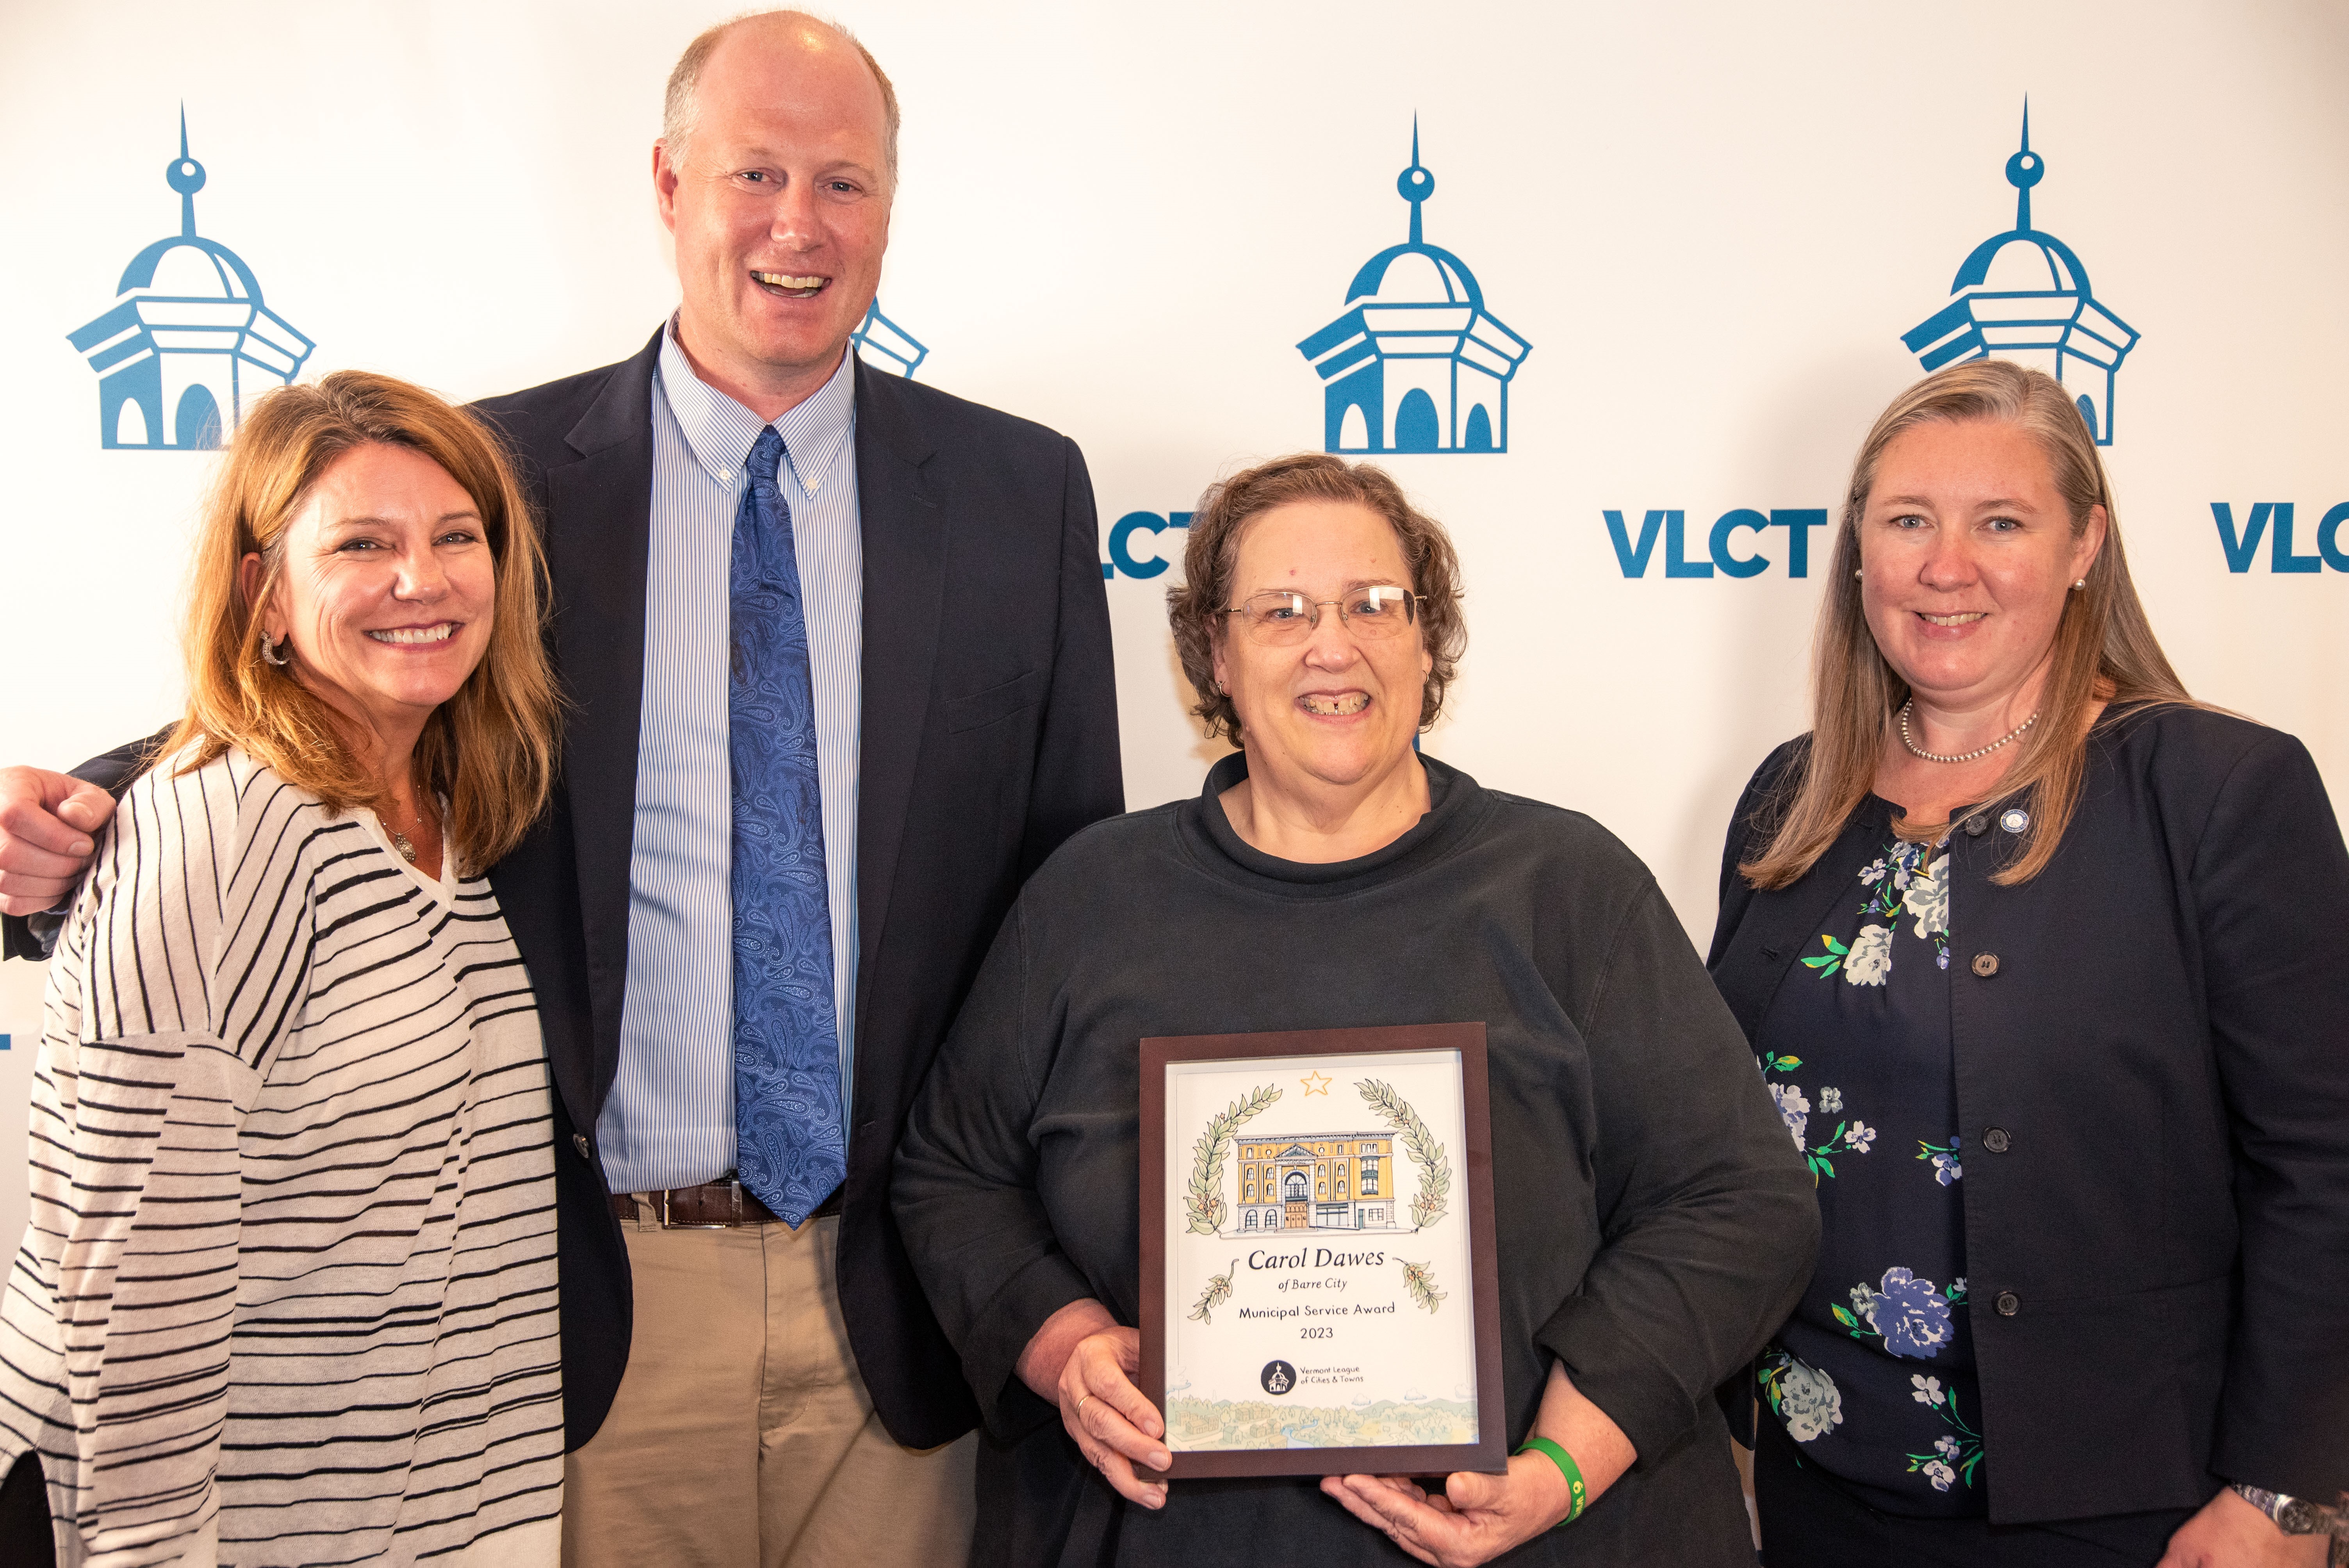 Presenting the 2023 VLCT Municipal Service Award were (l-r) West Rutland Town Manager  and VLCT board member Mary Ann Goulette, VLCT Executive Director Ted Brady, Barre City Clerk and Treasurer Carol Dawes, and VLCT Immediate Past President Jessi Baker.